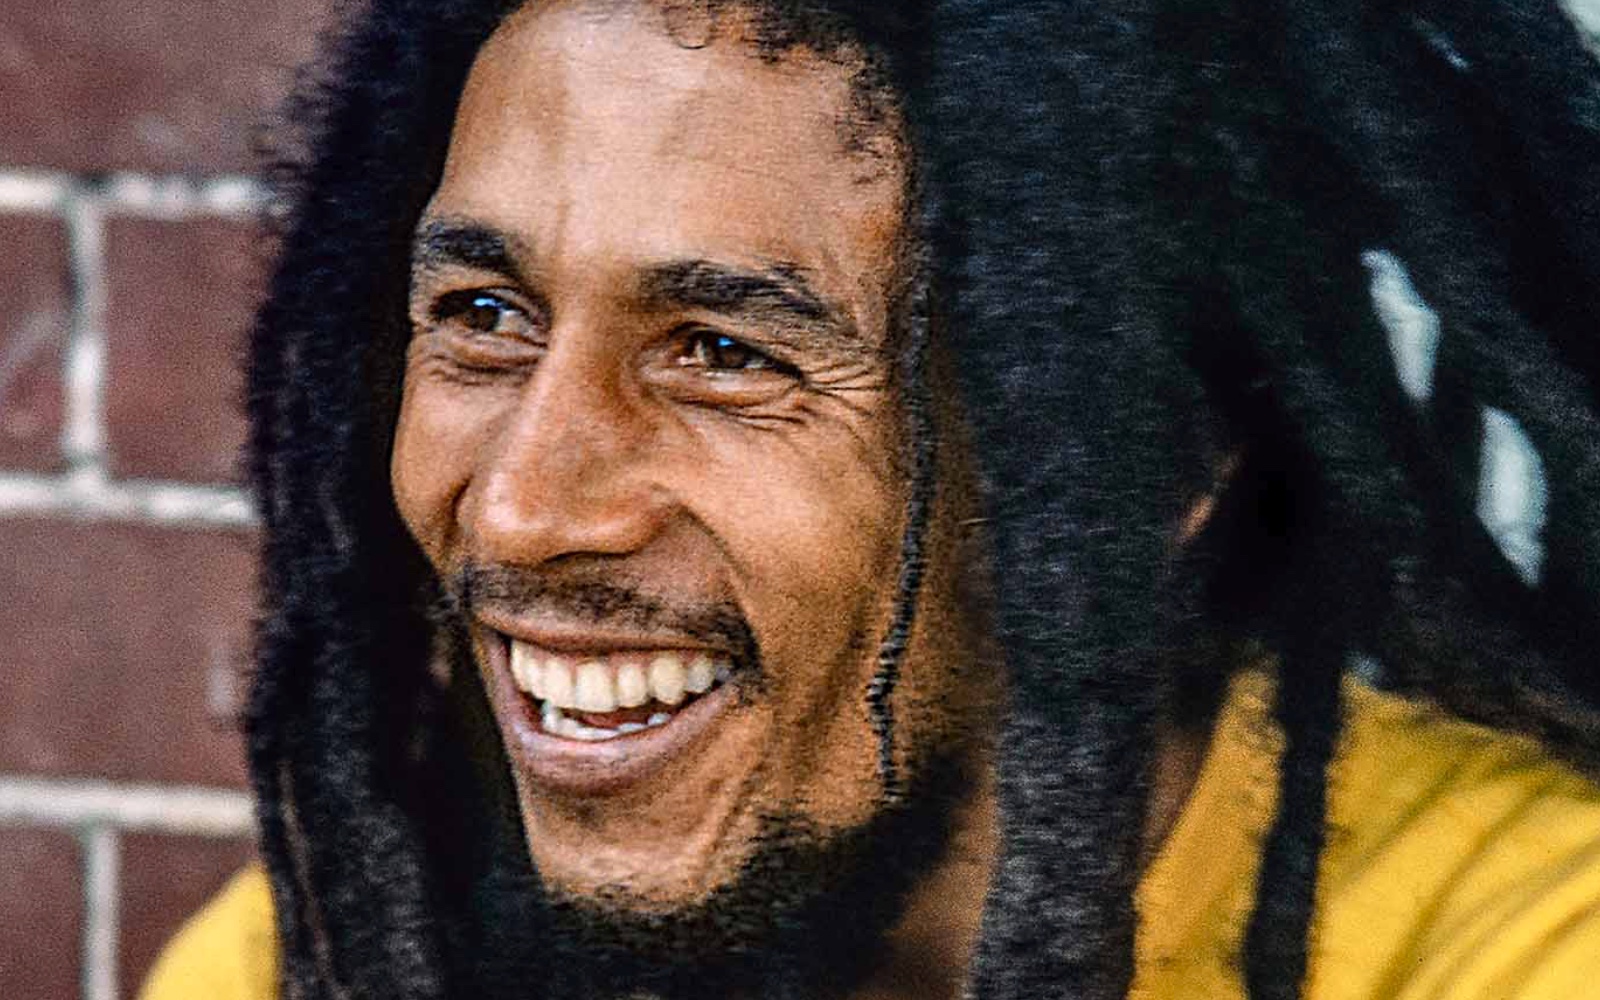 The last time Spain saw Bob Marley was a controversial, and unforgettable, night in Barcelona.